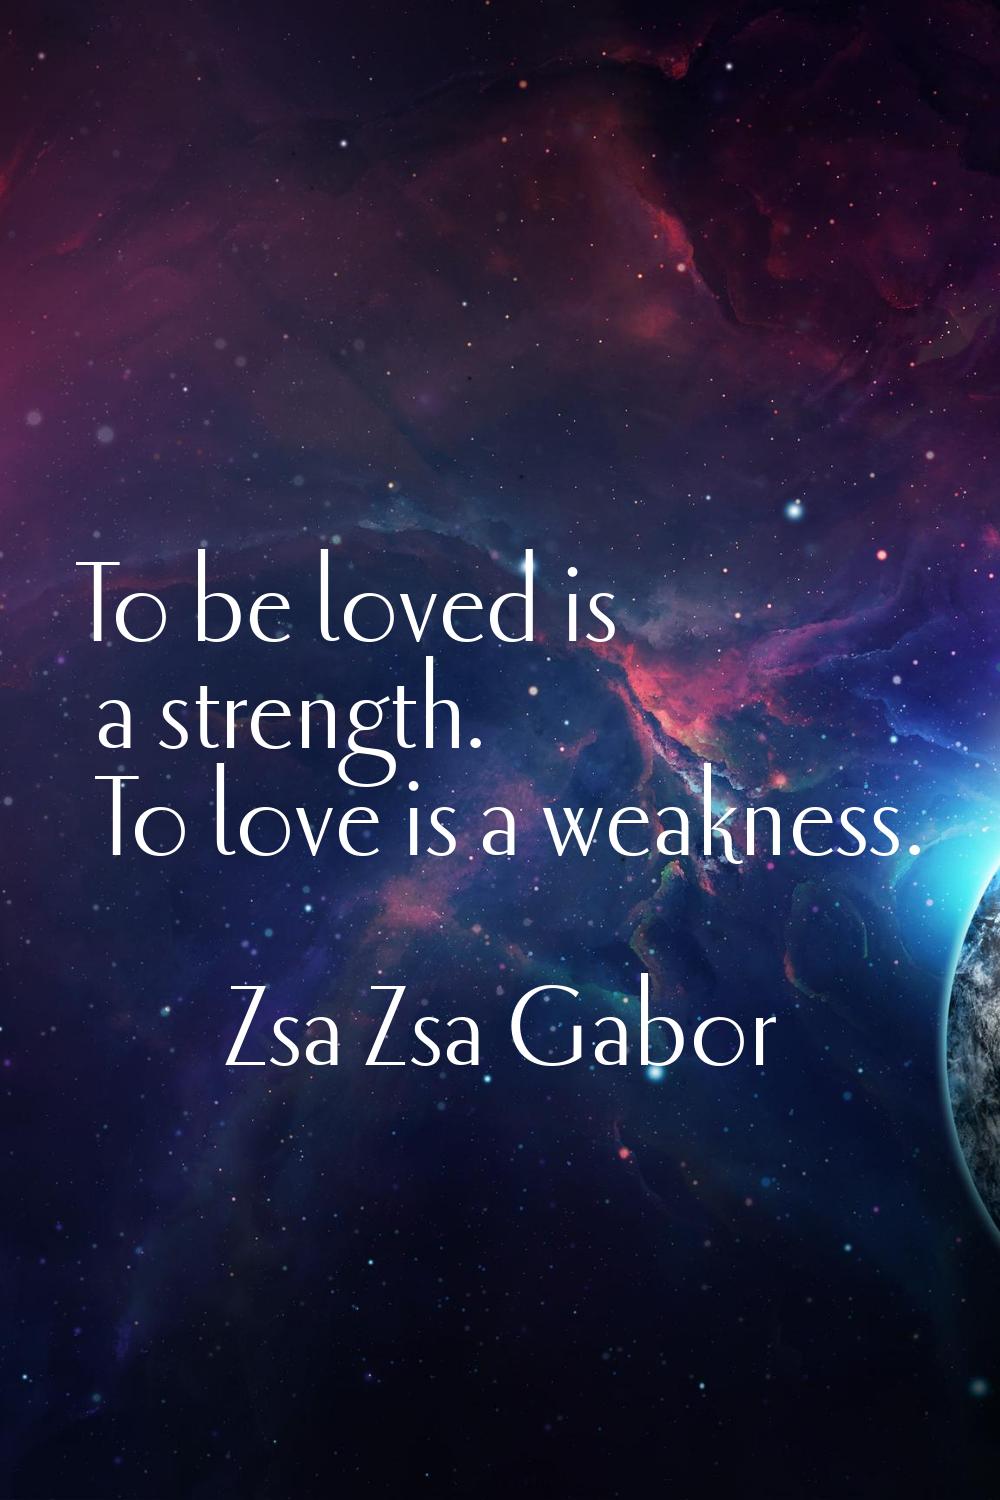 To be loved is a strength. To love is a weakness.